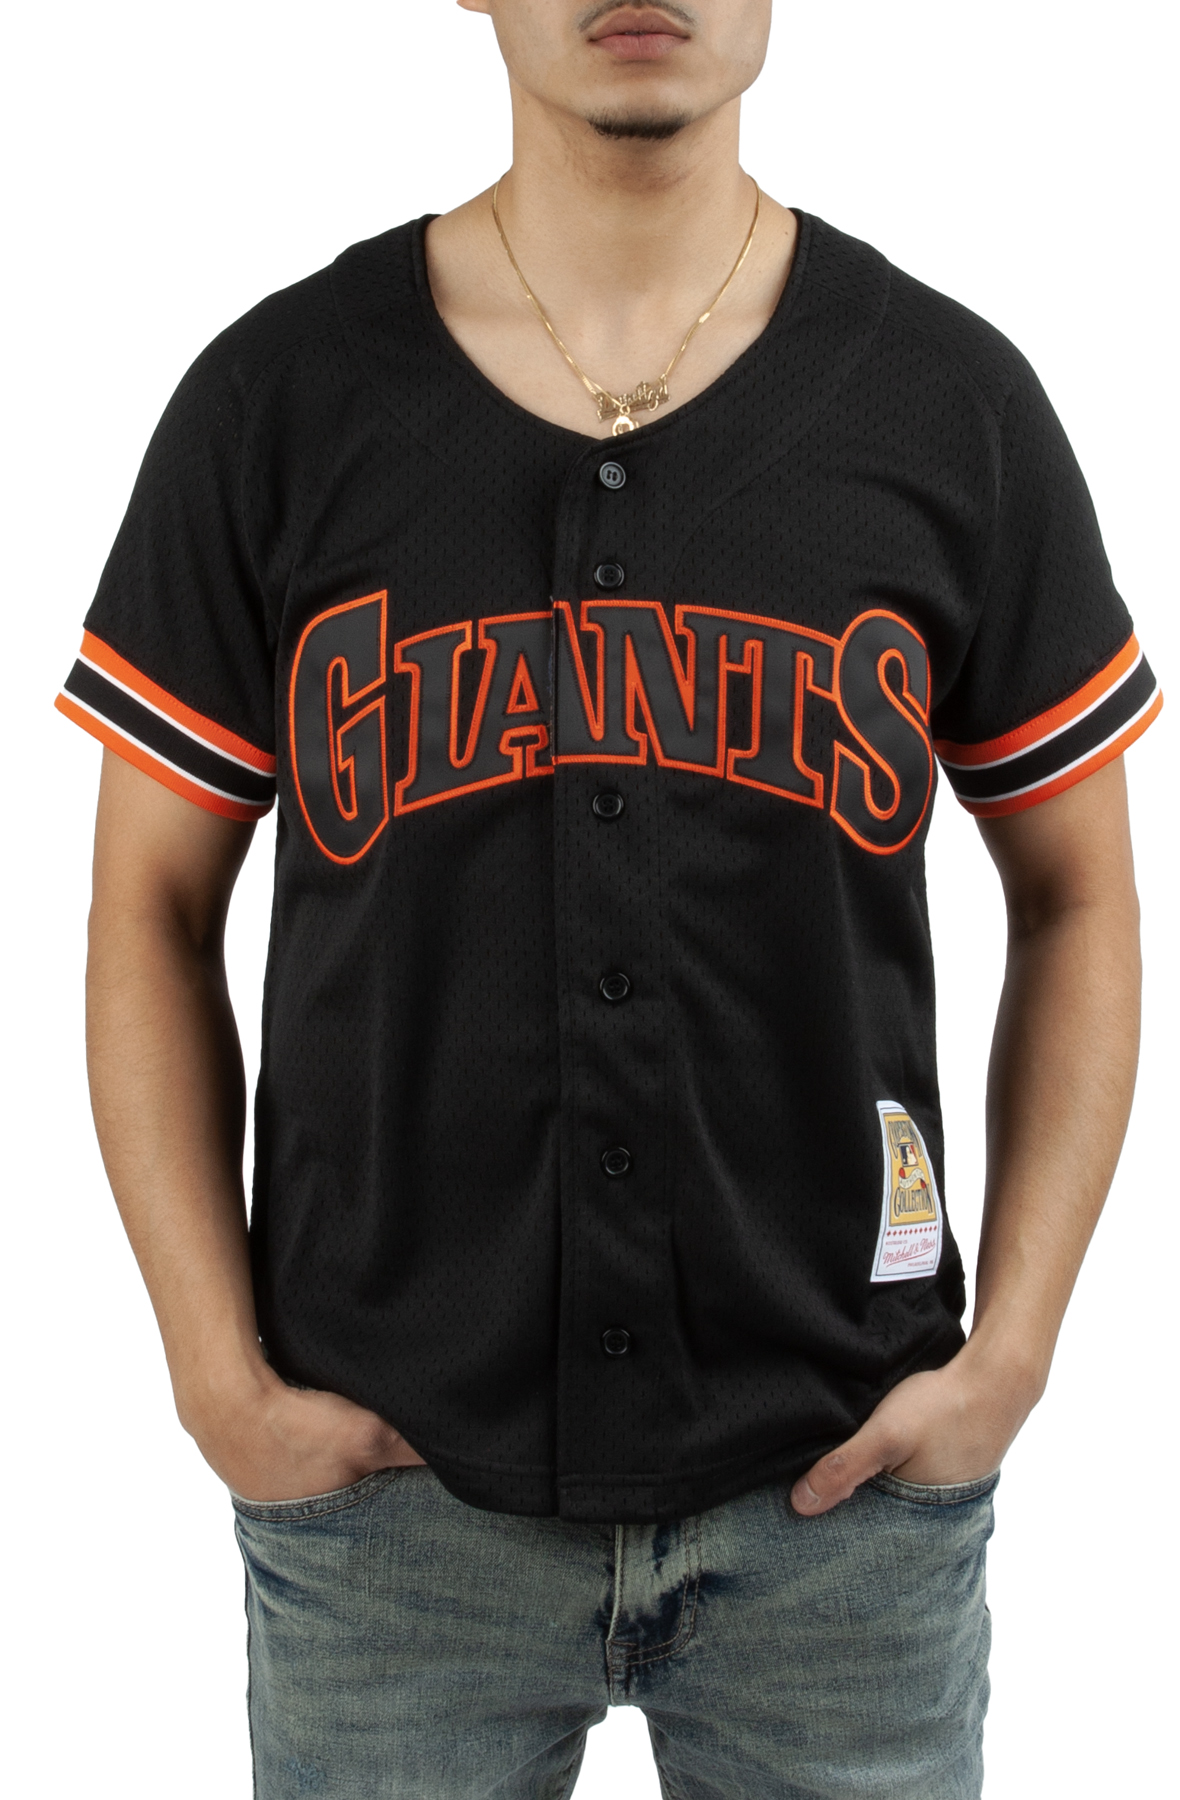 San Francisco Giants Mitchell Ness Cooperstown Collection Sz Small